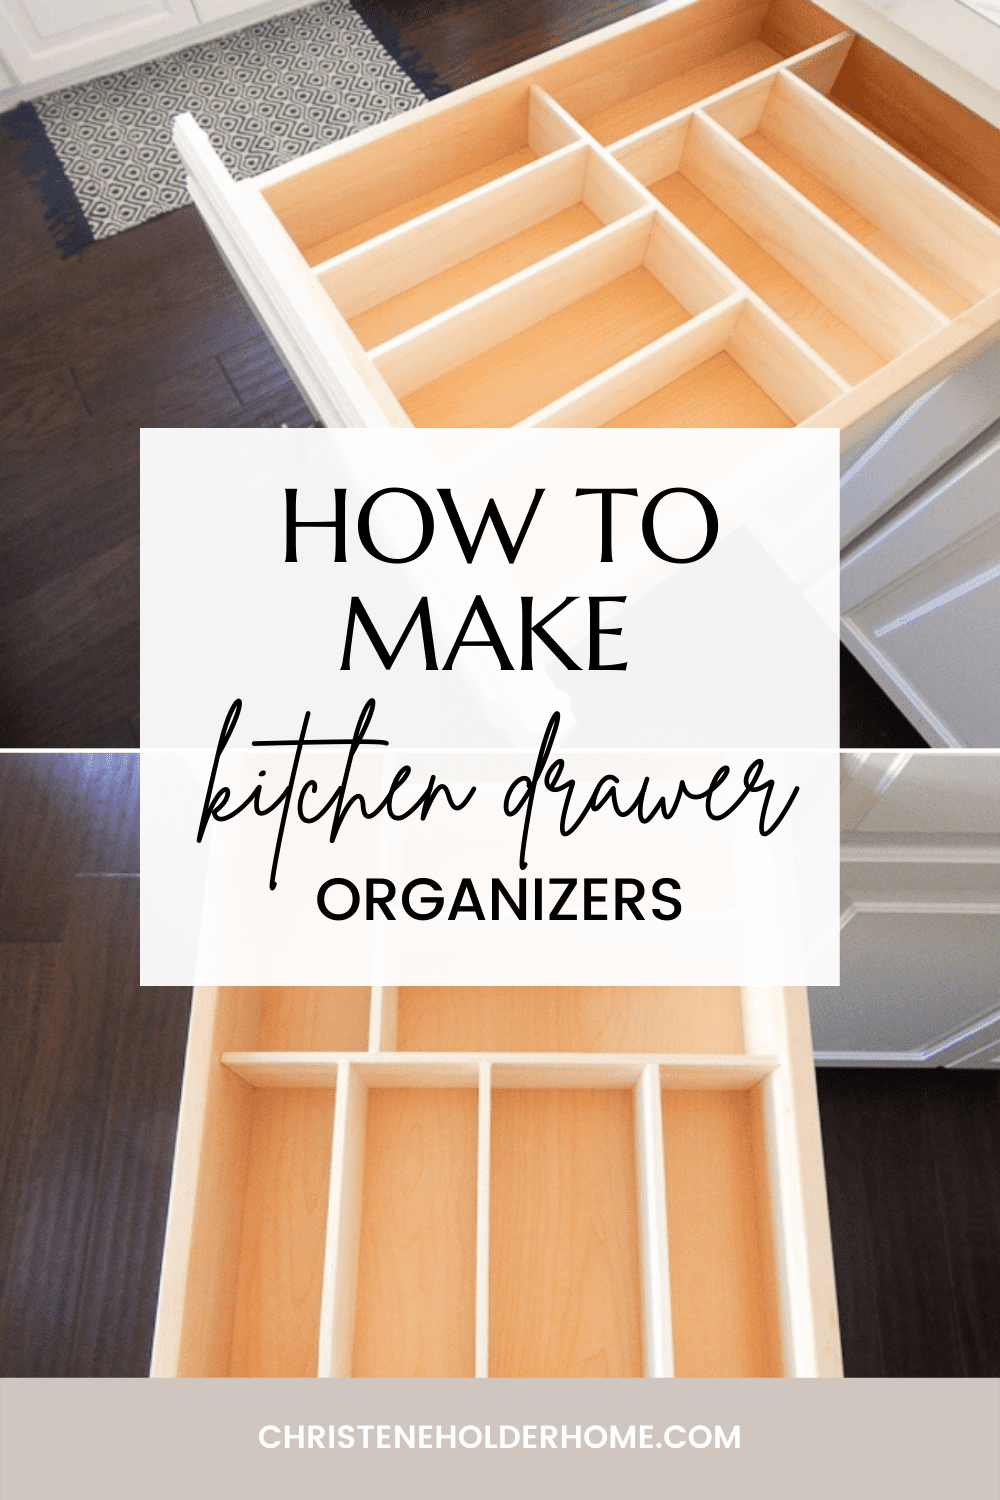 Easy DIY Drawer Dividers (Using What You've Got!) - The Homes I Have Made